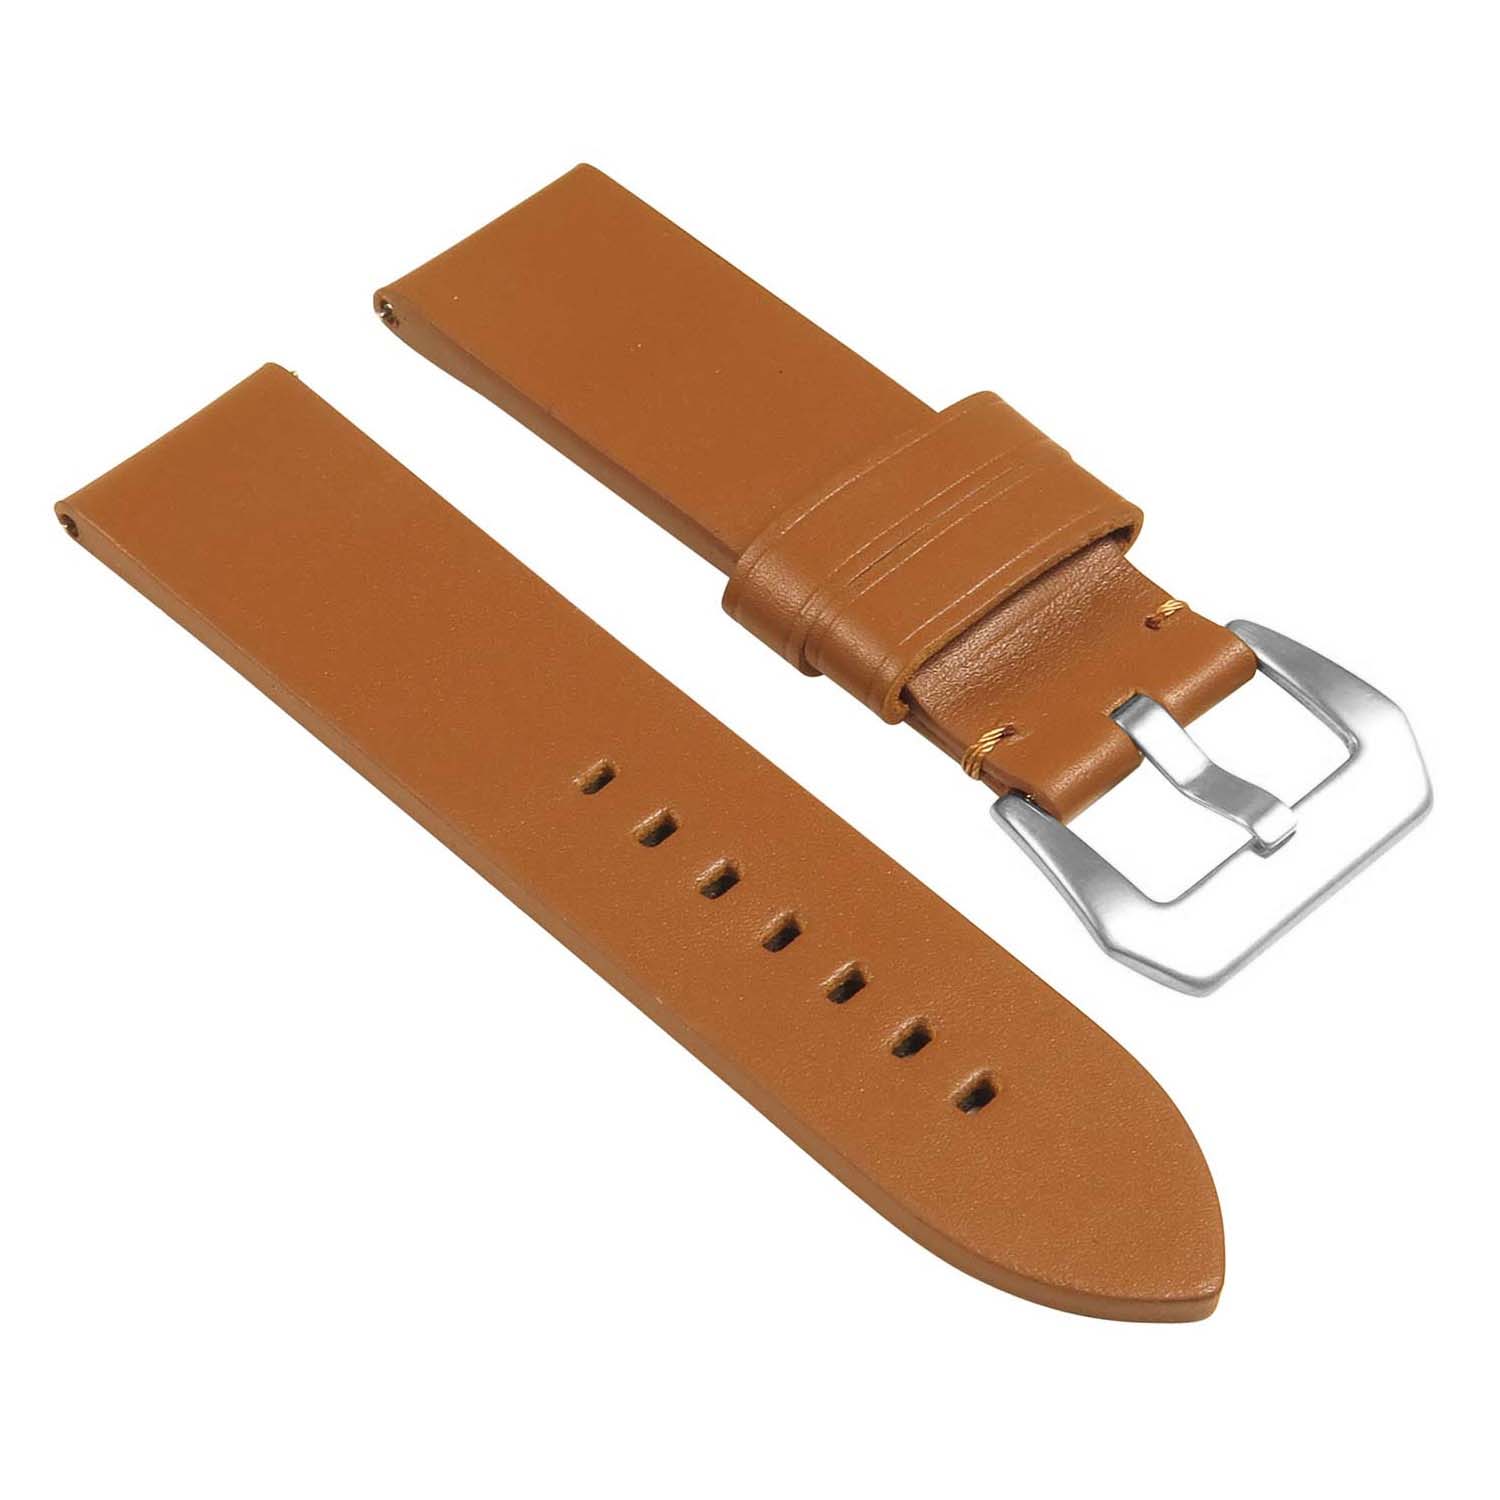 Thick Leather Strap With Quick Release